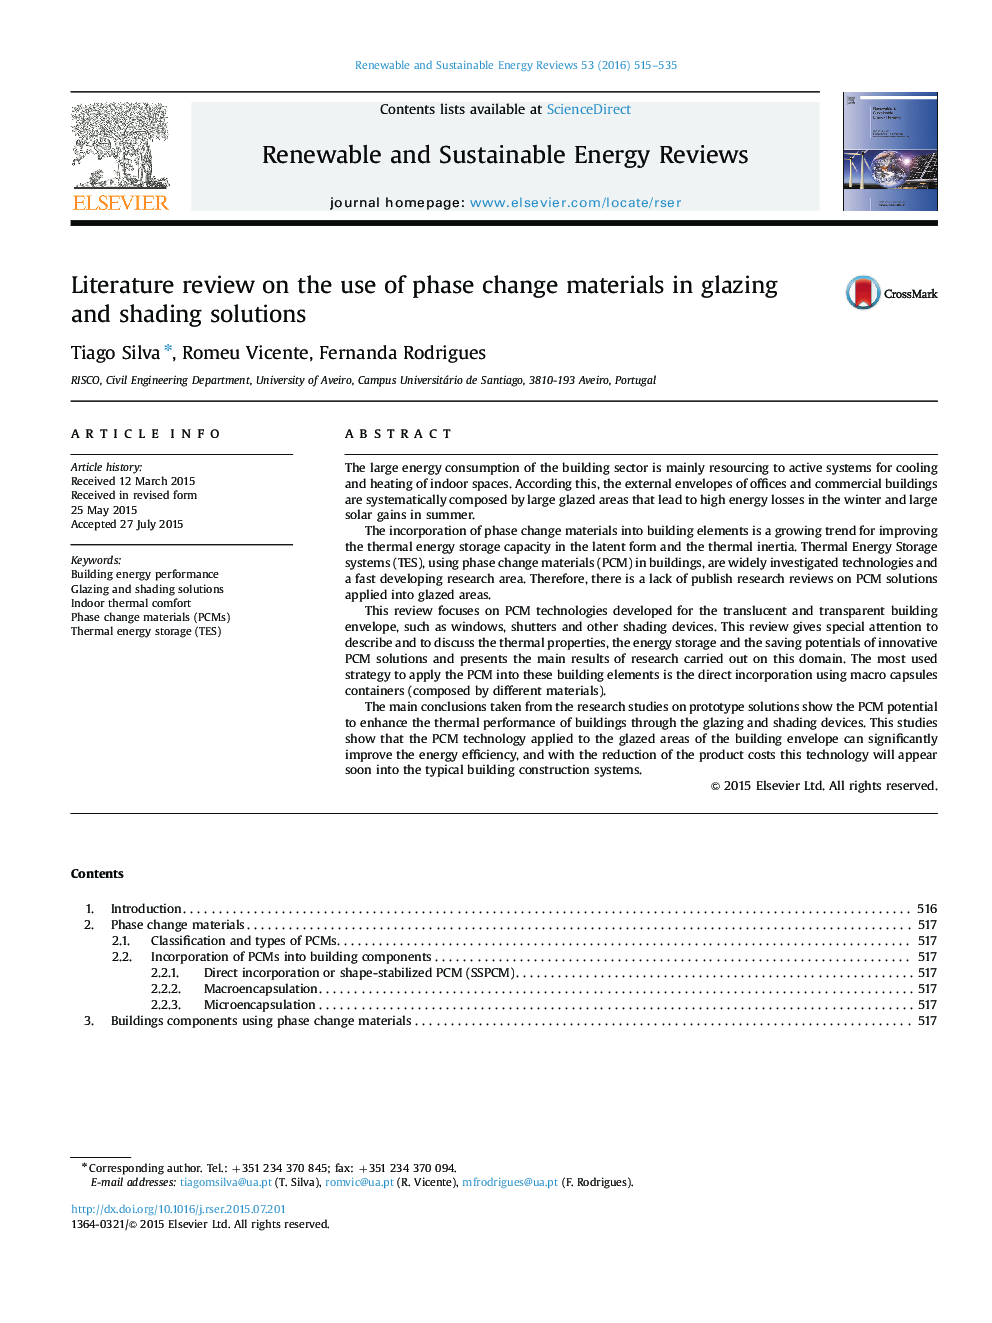 Literature review on the use of phase change materials in glazing and shading solutions